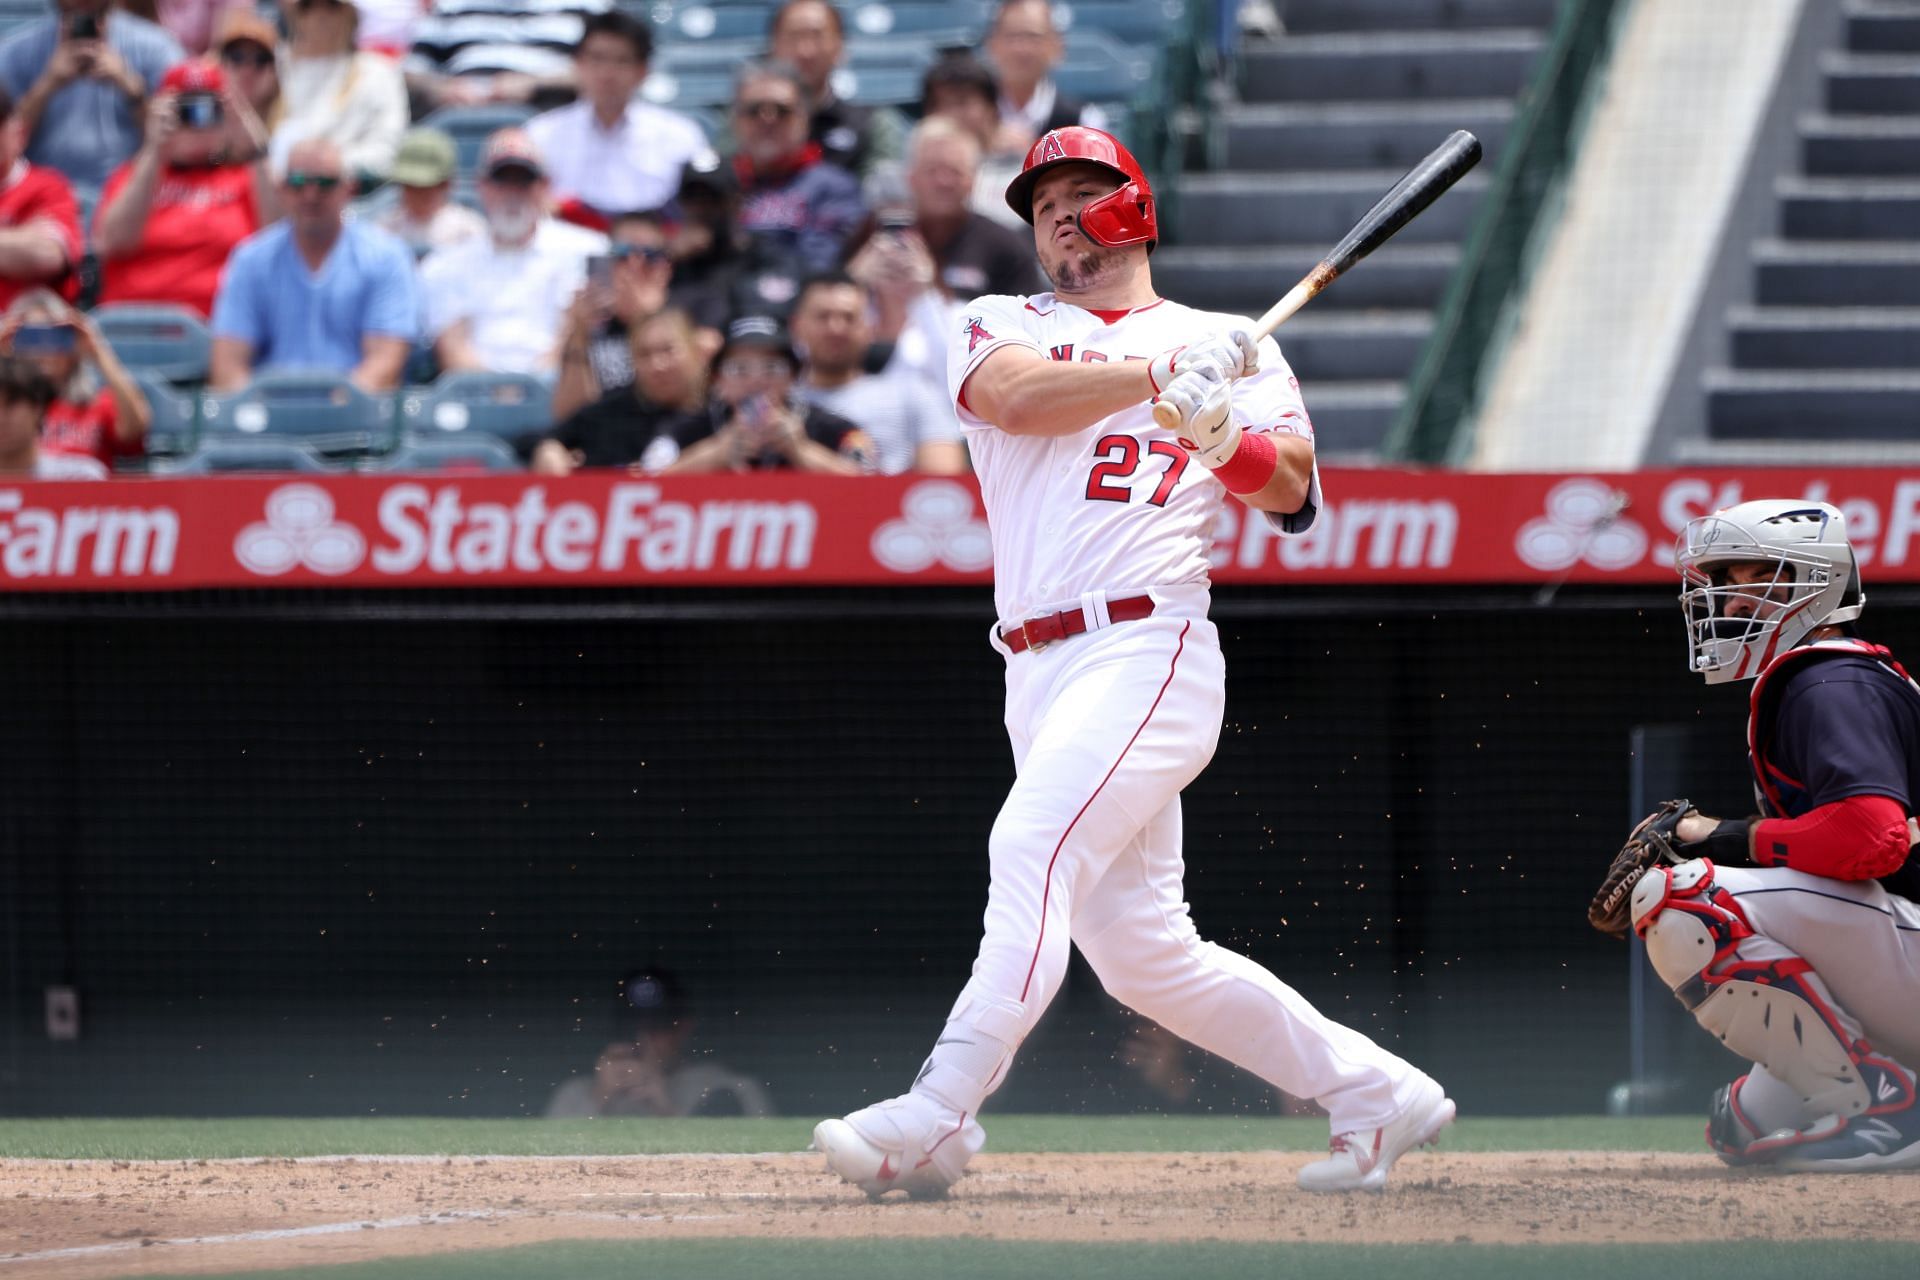 Mike Trout of the Los Angeles Angels